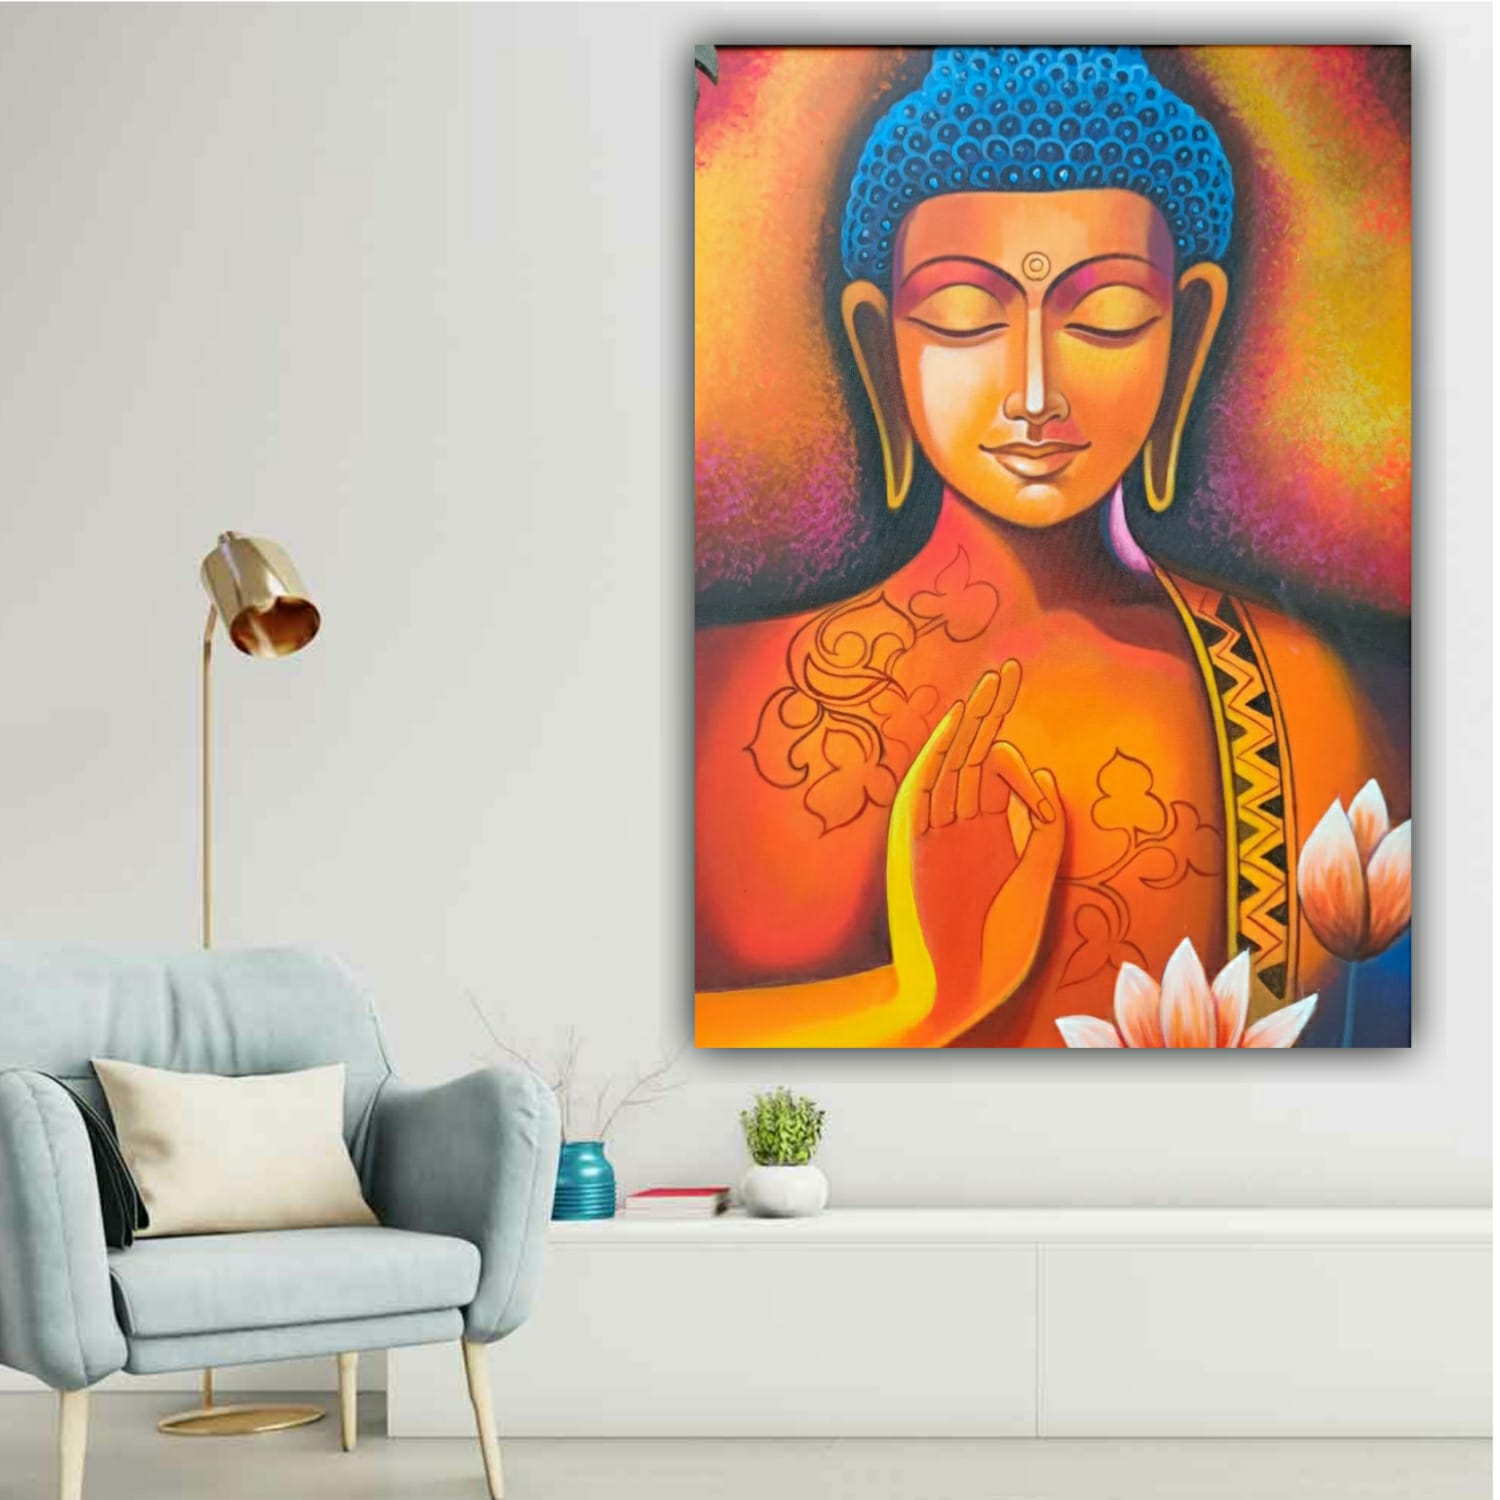 Blessing Lord Buddha Painting with Frame (24 by 36 Inches)